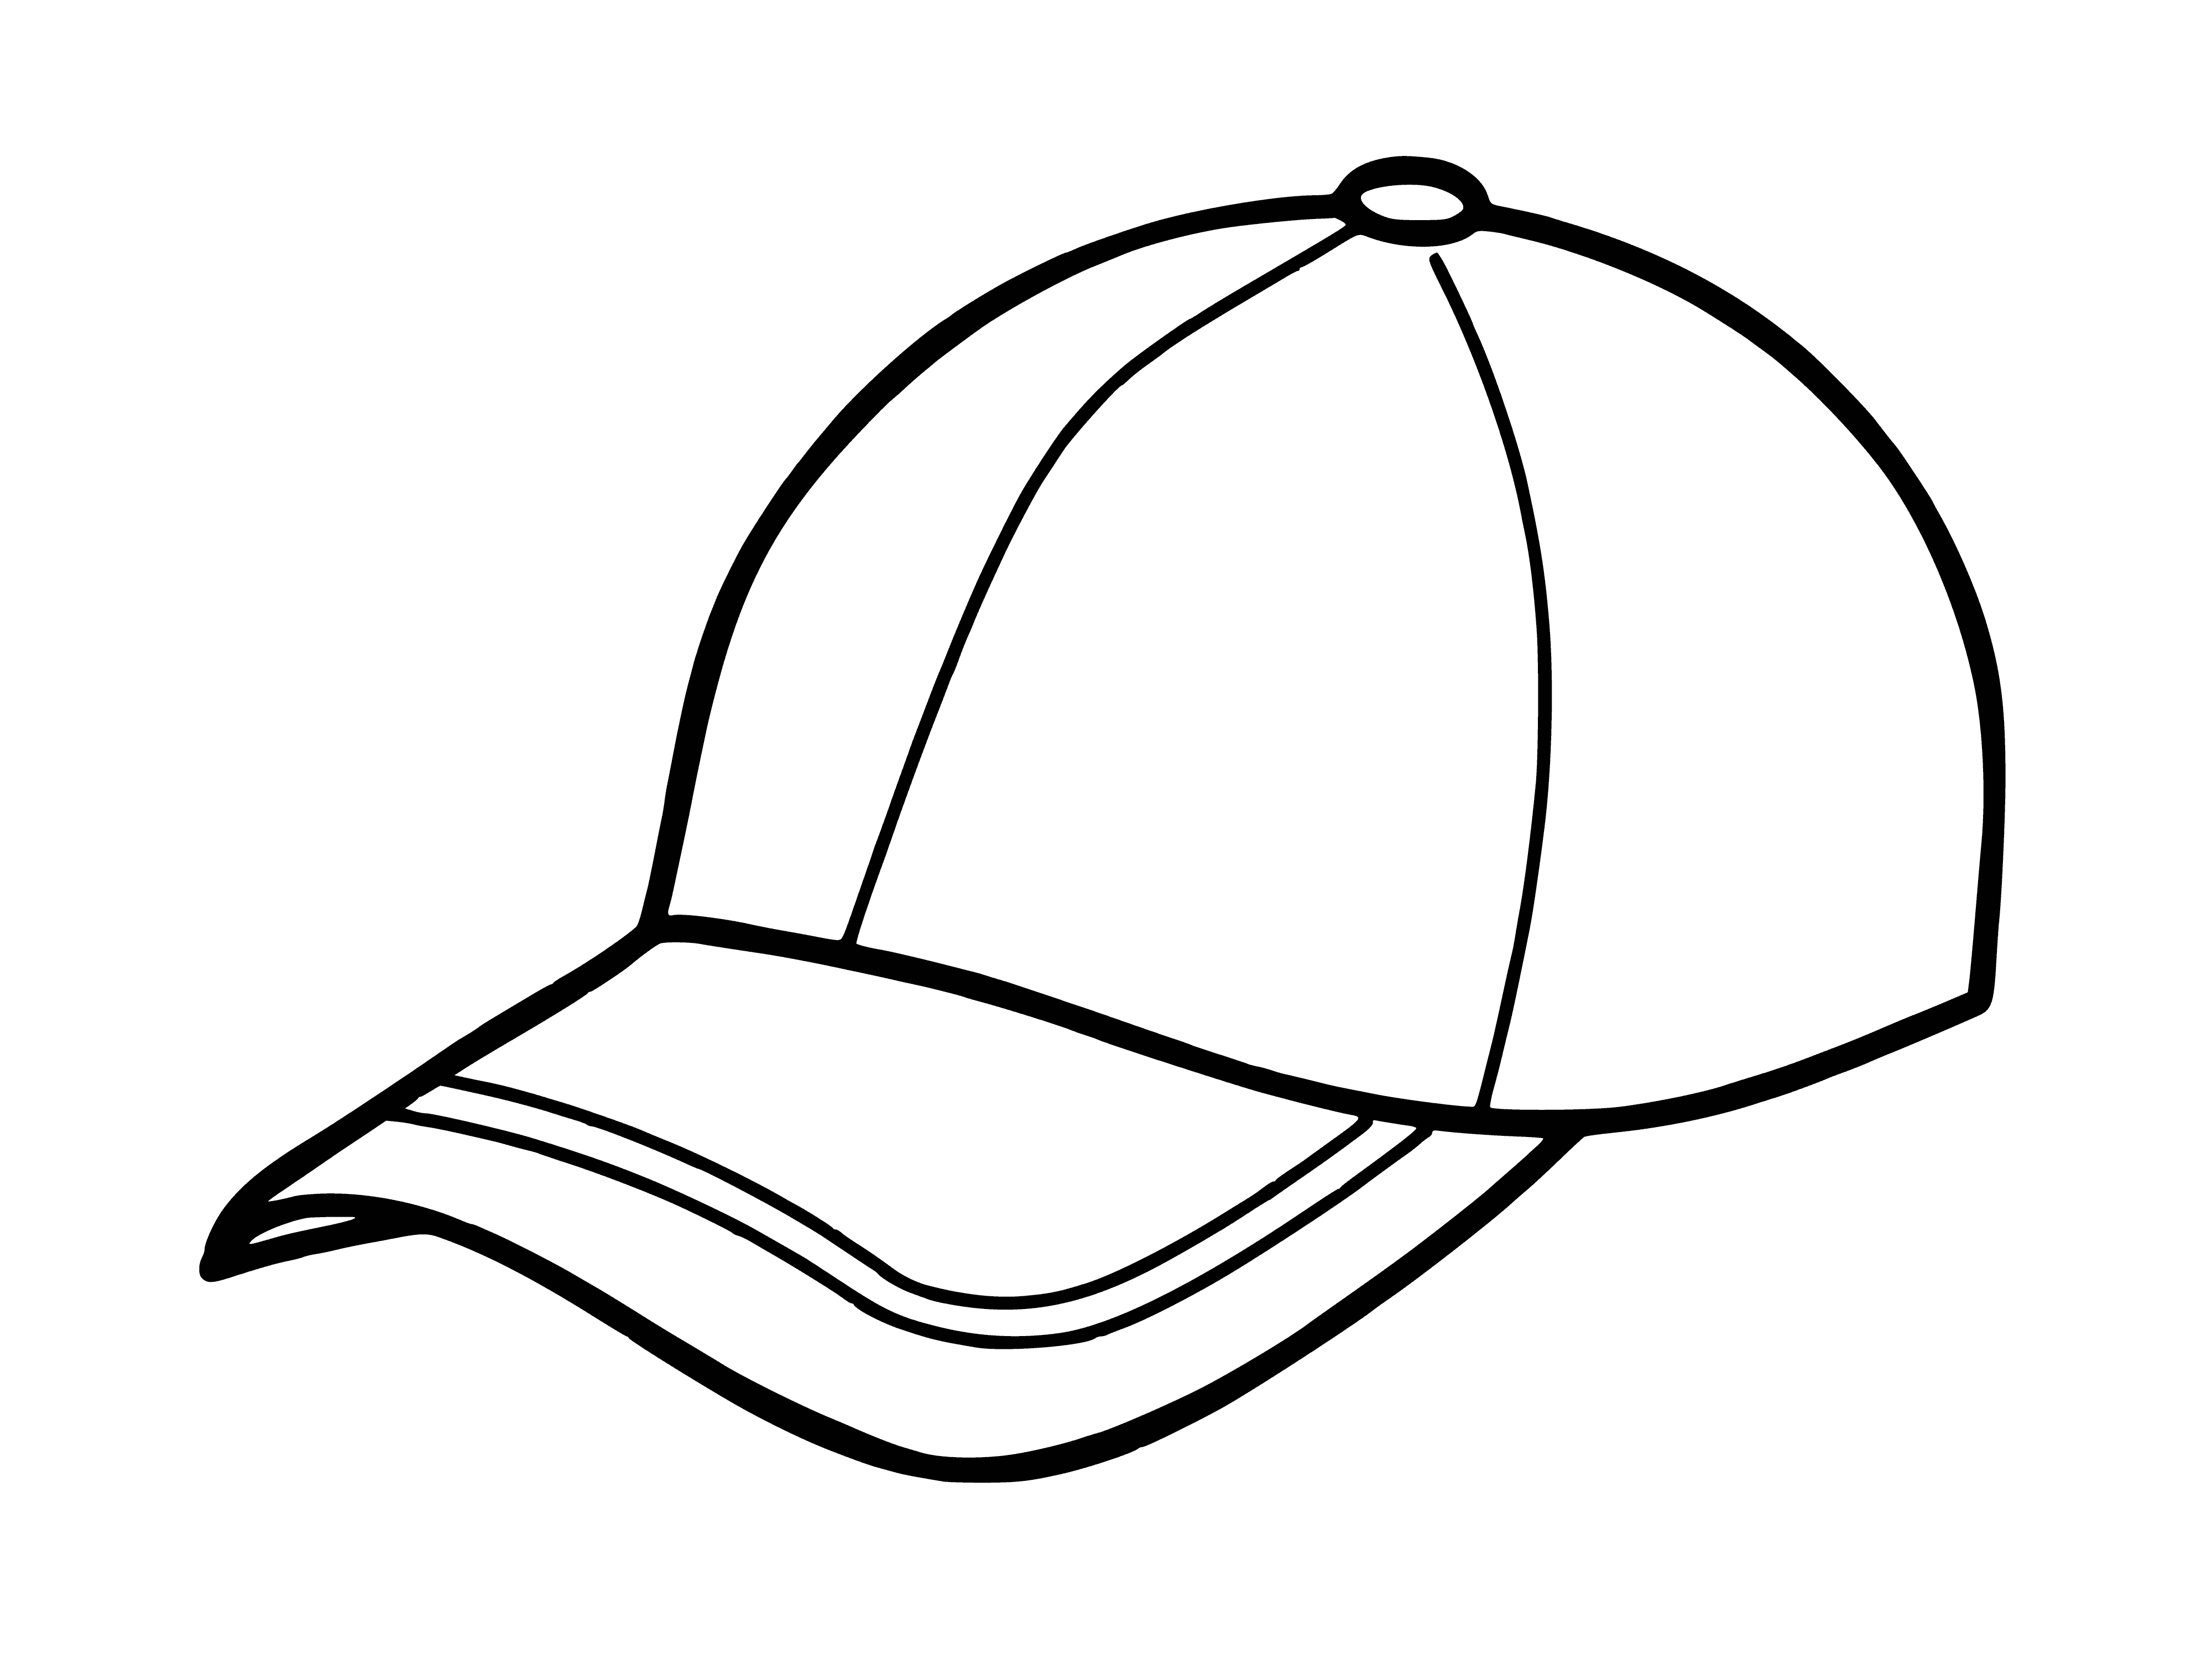 coloring page: Baseball cap coloring pagegraph: fabric, curved bill, adjustable strap - perfect for players & fans to protect from sun.